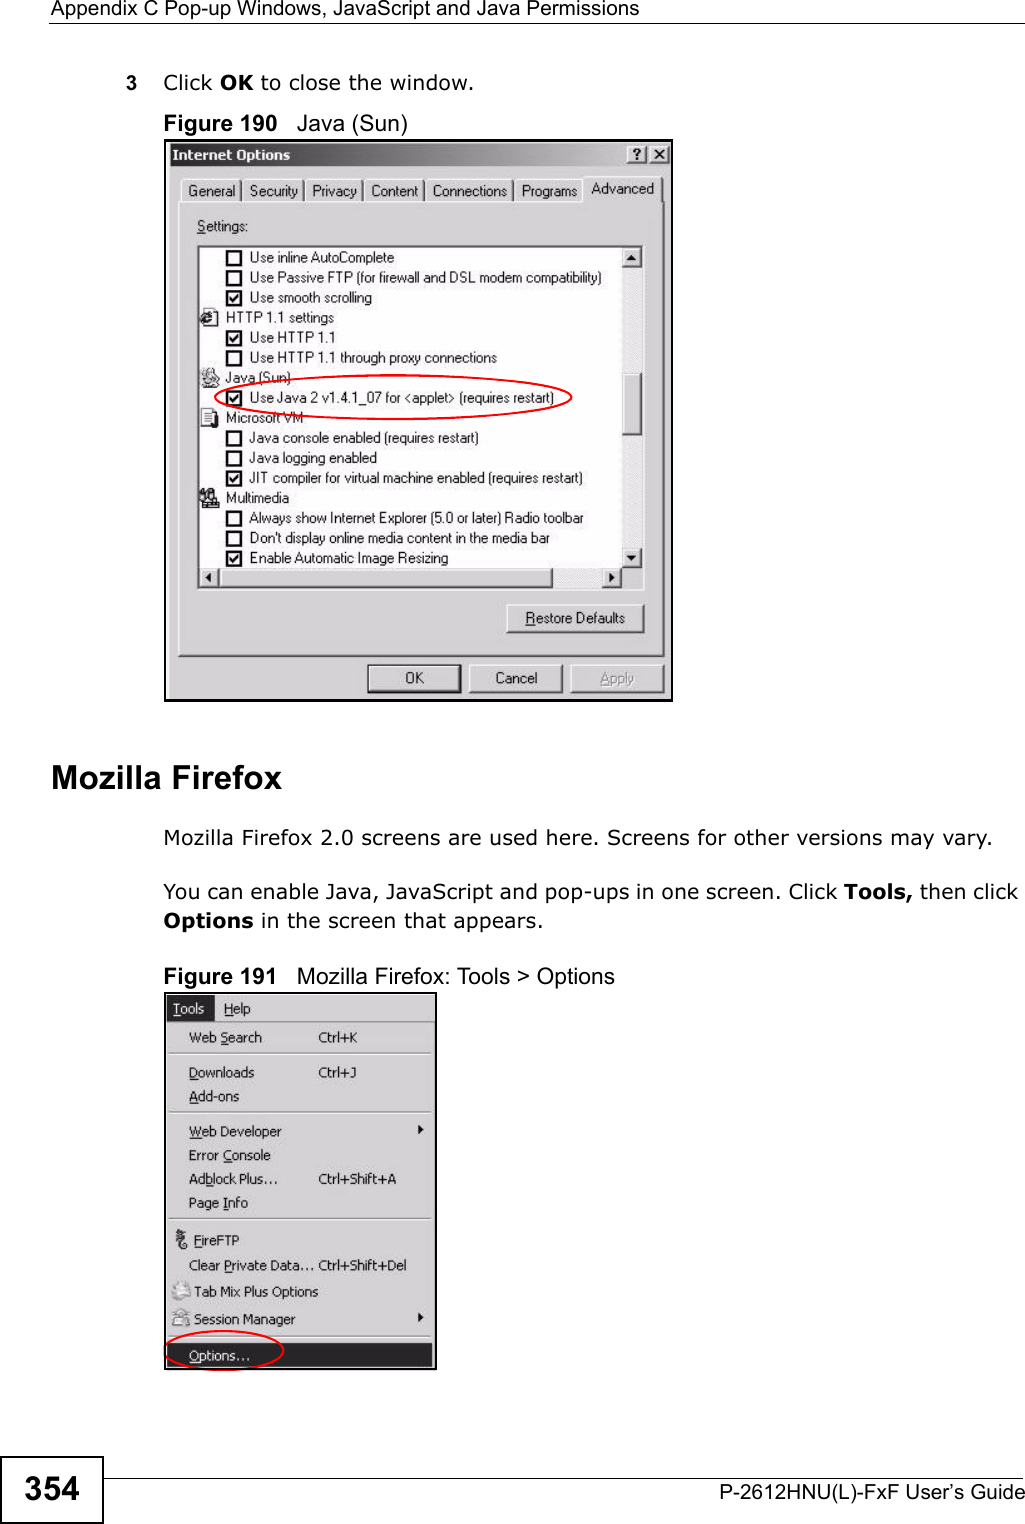 Appendix C Pop-up Windows, JavaScript and Java PermissionsP-2612HNU(L)-FxF User’s Guide3543Click OK to close the window.Figure 190   Java (Sun)Mozilla FirefoxMozilla Firefox 2.0 screens are used here. Screens for other versions may vary. You can enable Java, JavaScript and pop-ups in one screen. Click Tools, then click Options in the screen that appears.Figure 191   Mozilla Firefox: Tools &gt; Options